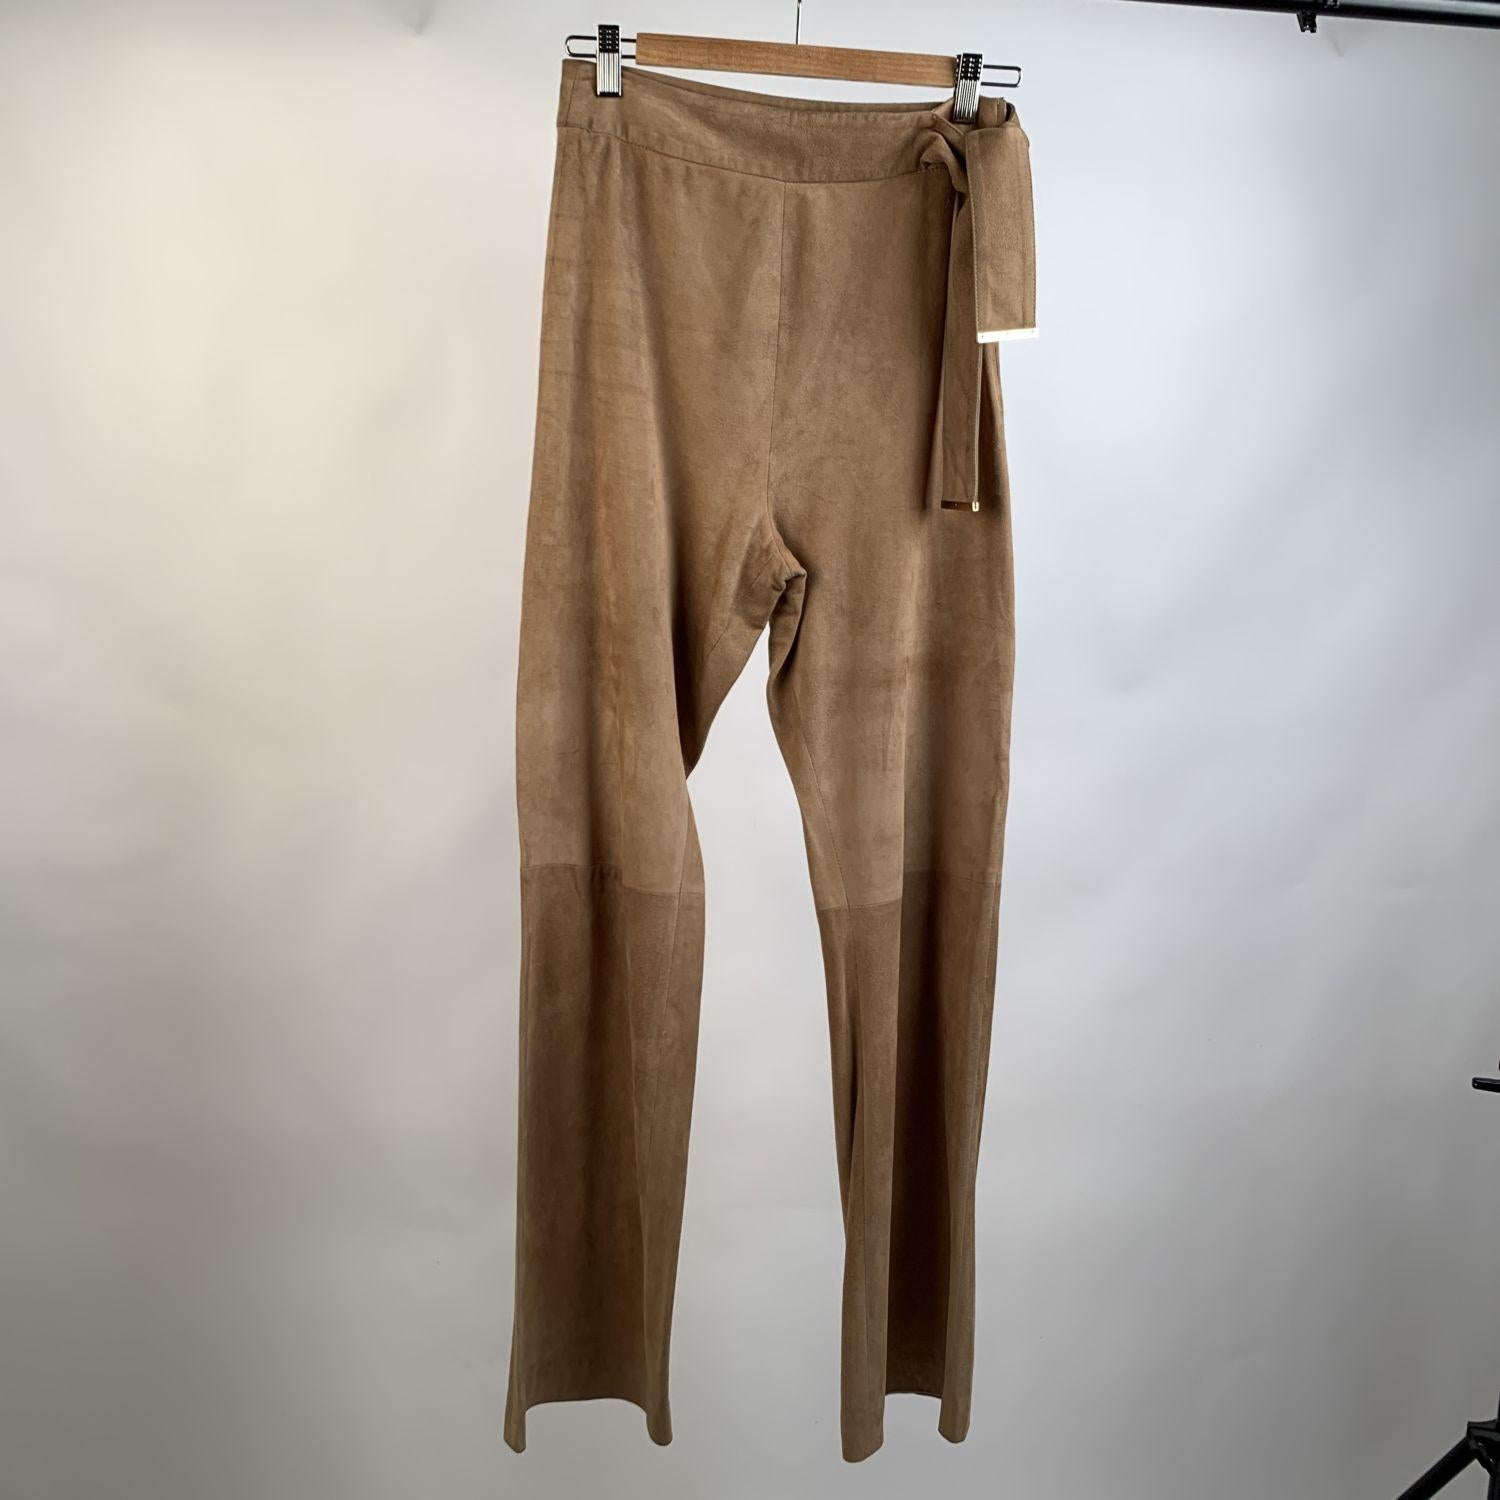 Gucci beige suede trousers. They feature knot detailing on the waist and side zip closure. Unlined. High waist. Composition: 100% Leather . Size: 40 IT (ot should correspond to a SMALL size



Details

MATERIAL: Leather

COLOR: Beige

MODEL: